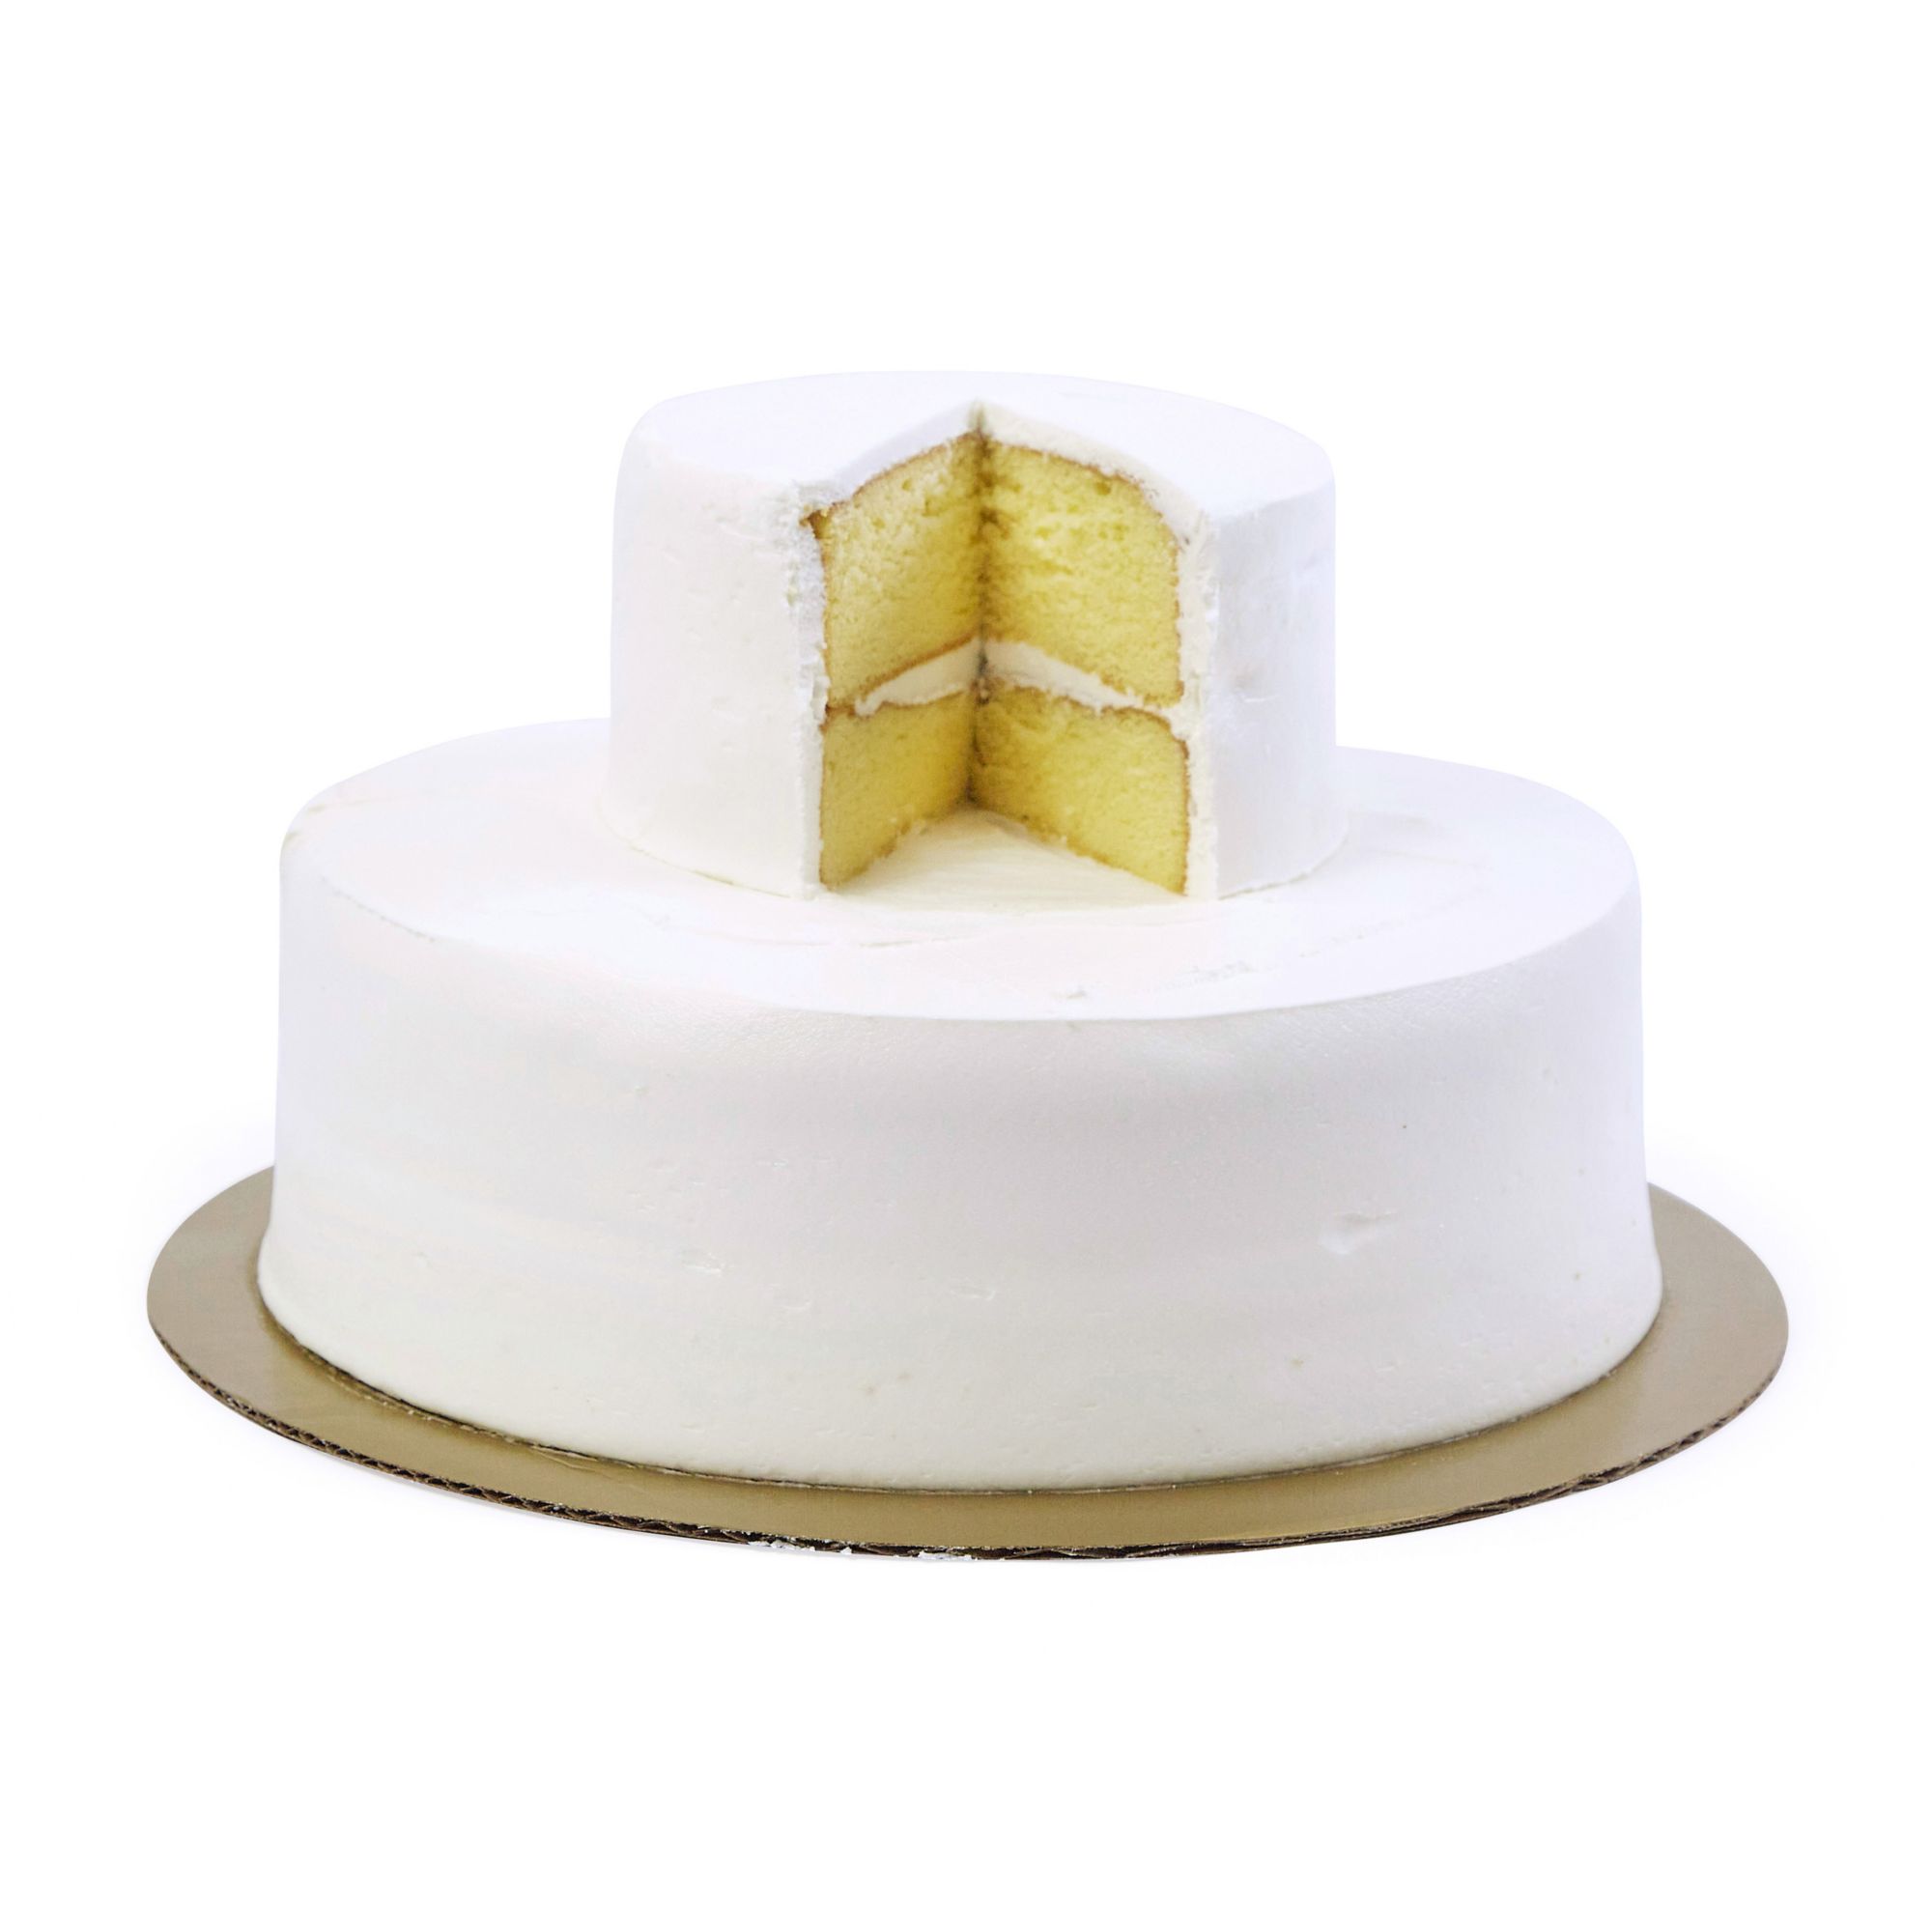 Wellsley Farms Two-Tiered Round Gold Cake, Serves 30